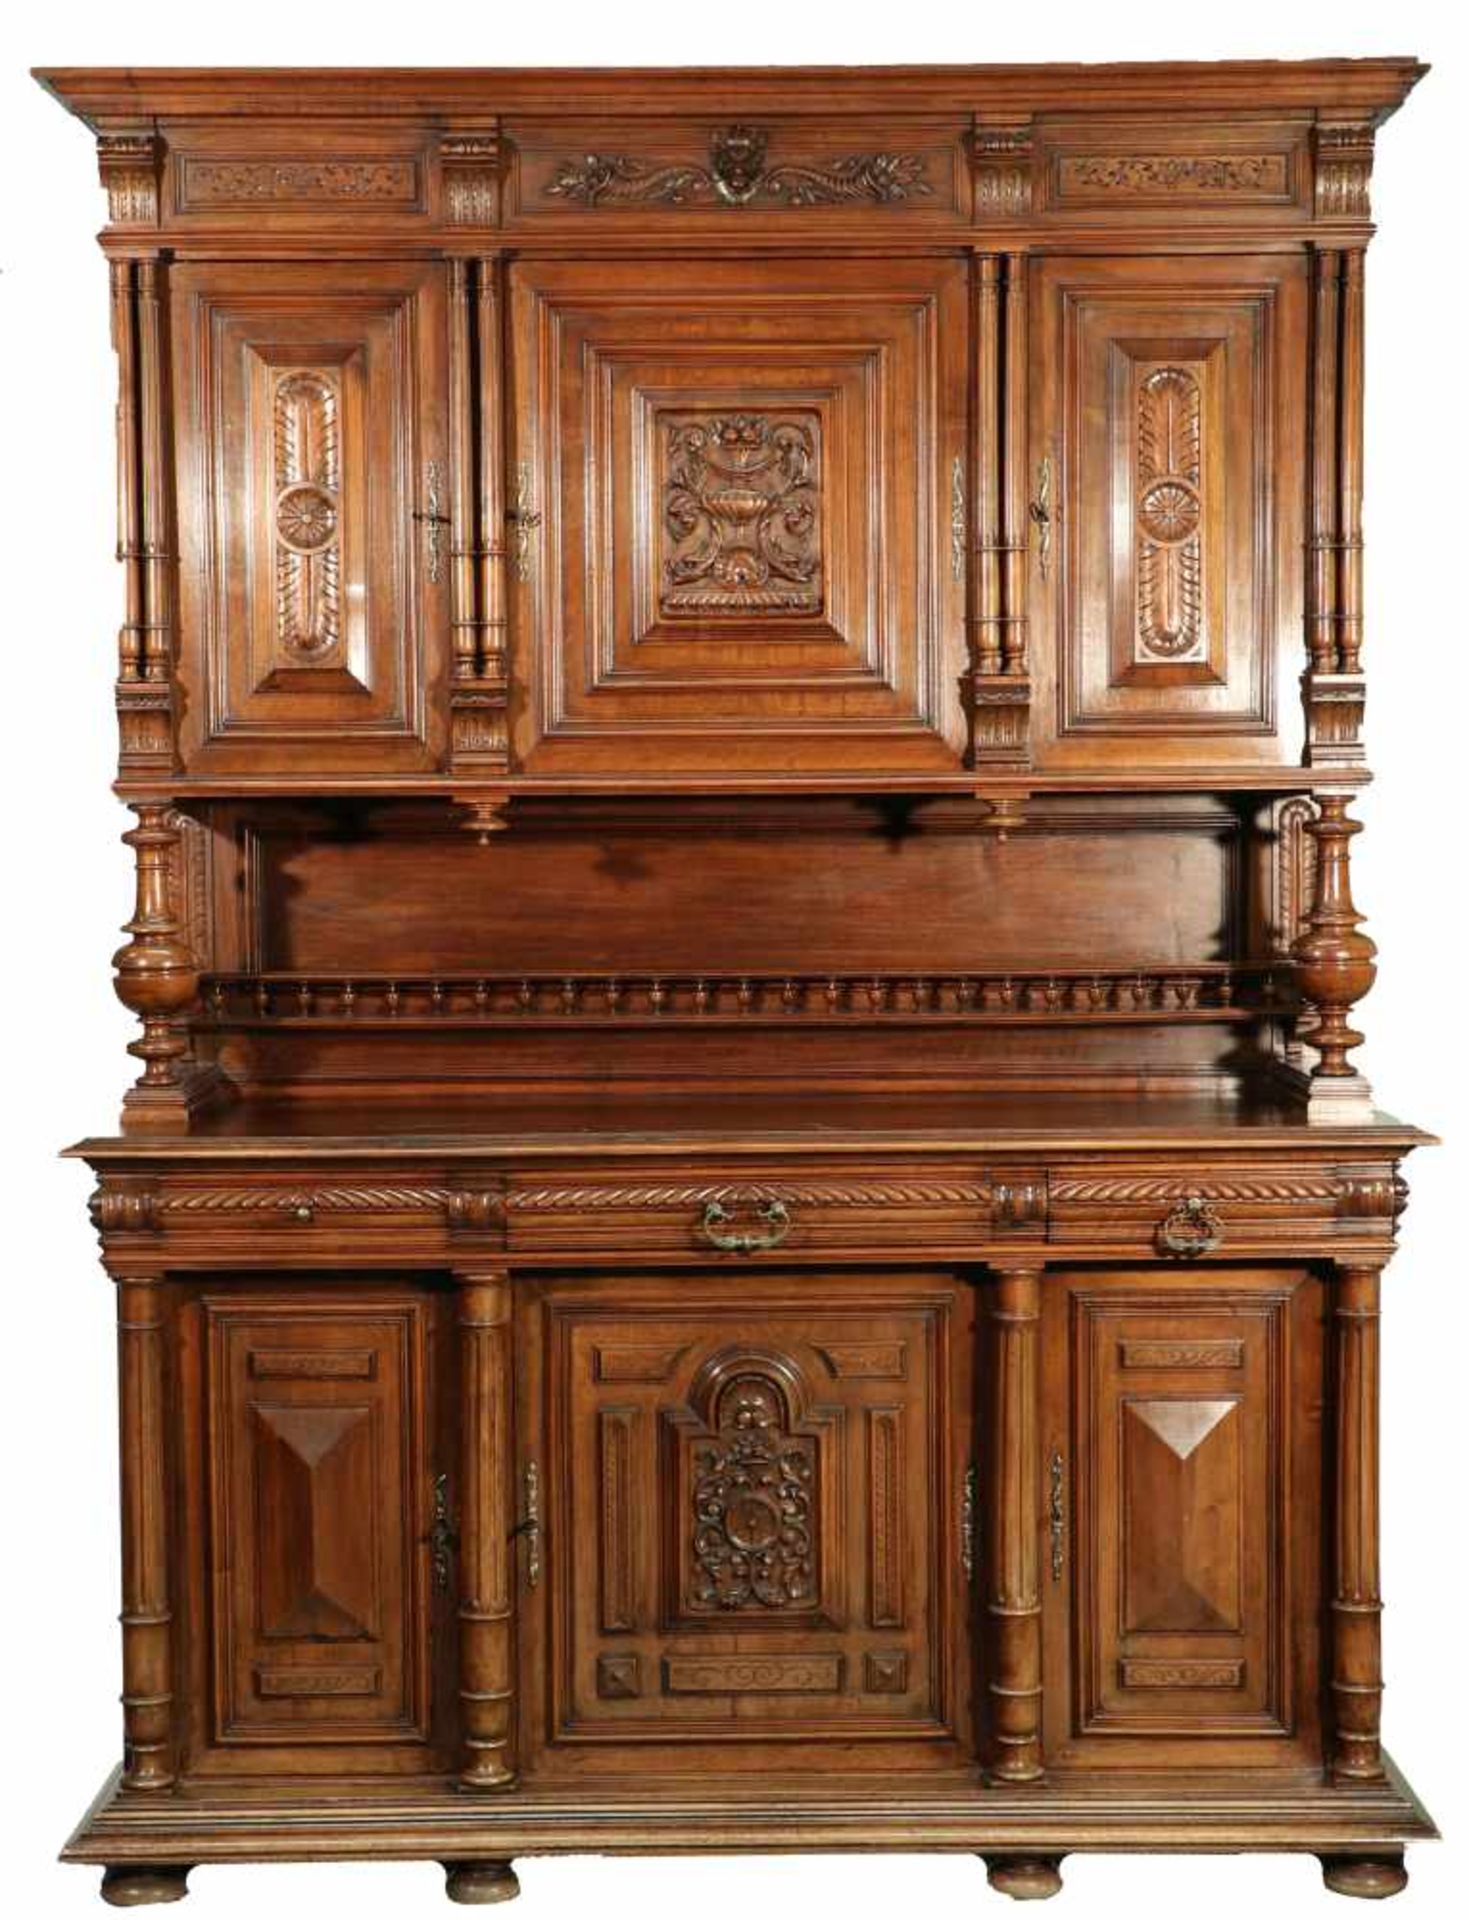 An oak cabinet with columns and brass mounts. Circa 1900.